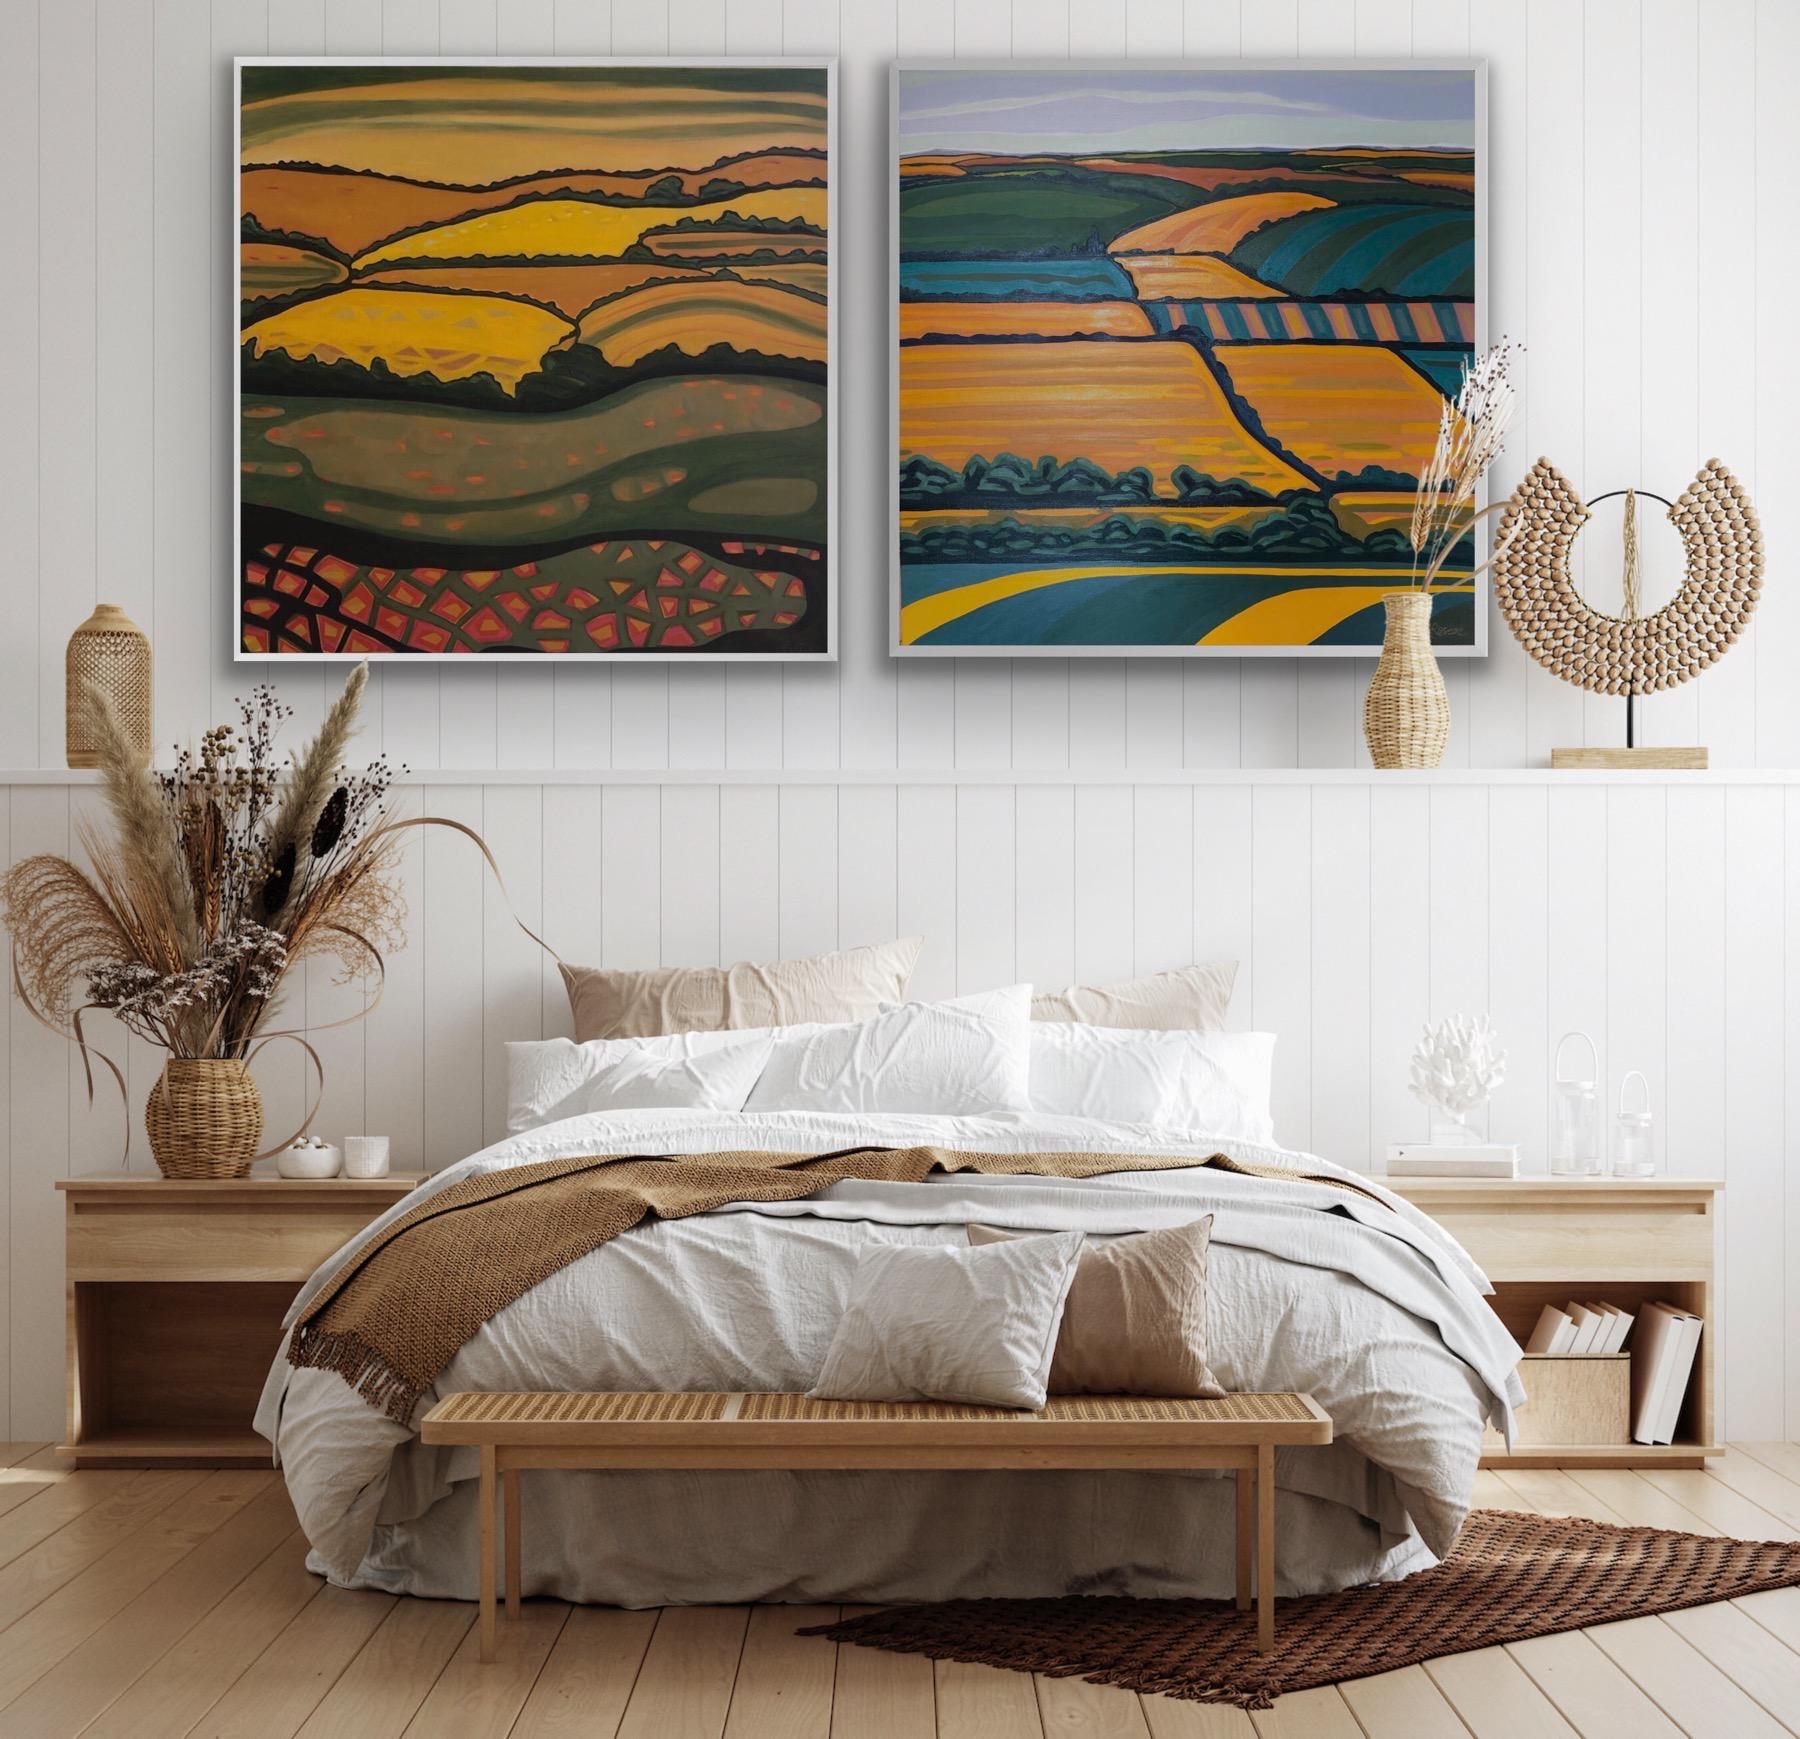  diptych of Whimsical Fields and Hill View no. 2 Contemporary Landscape art - Painting by Alexa Roscoe